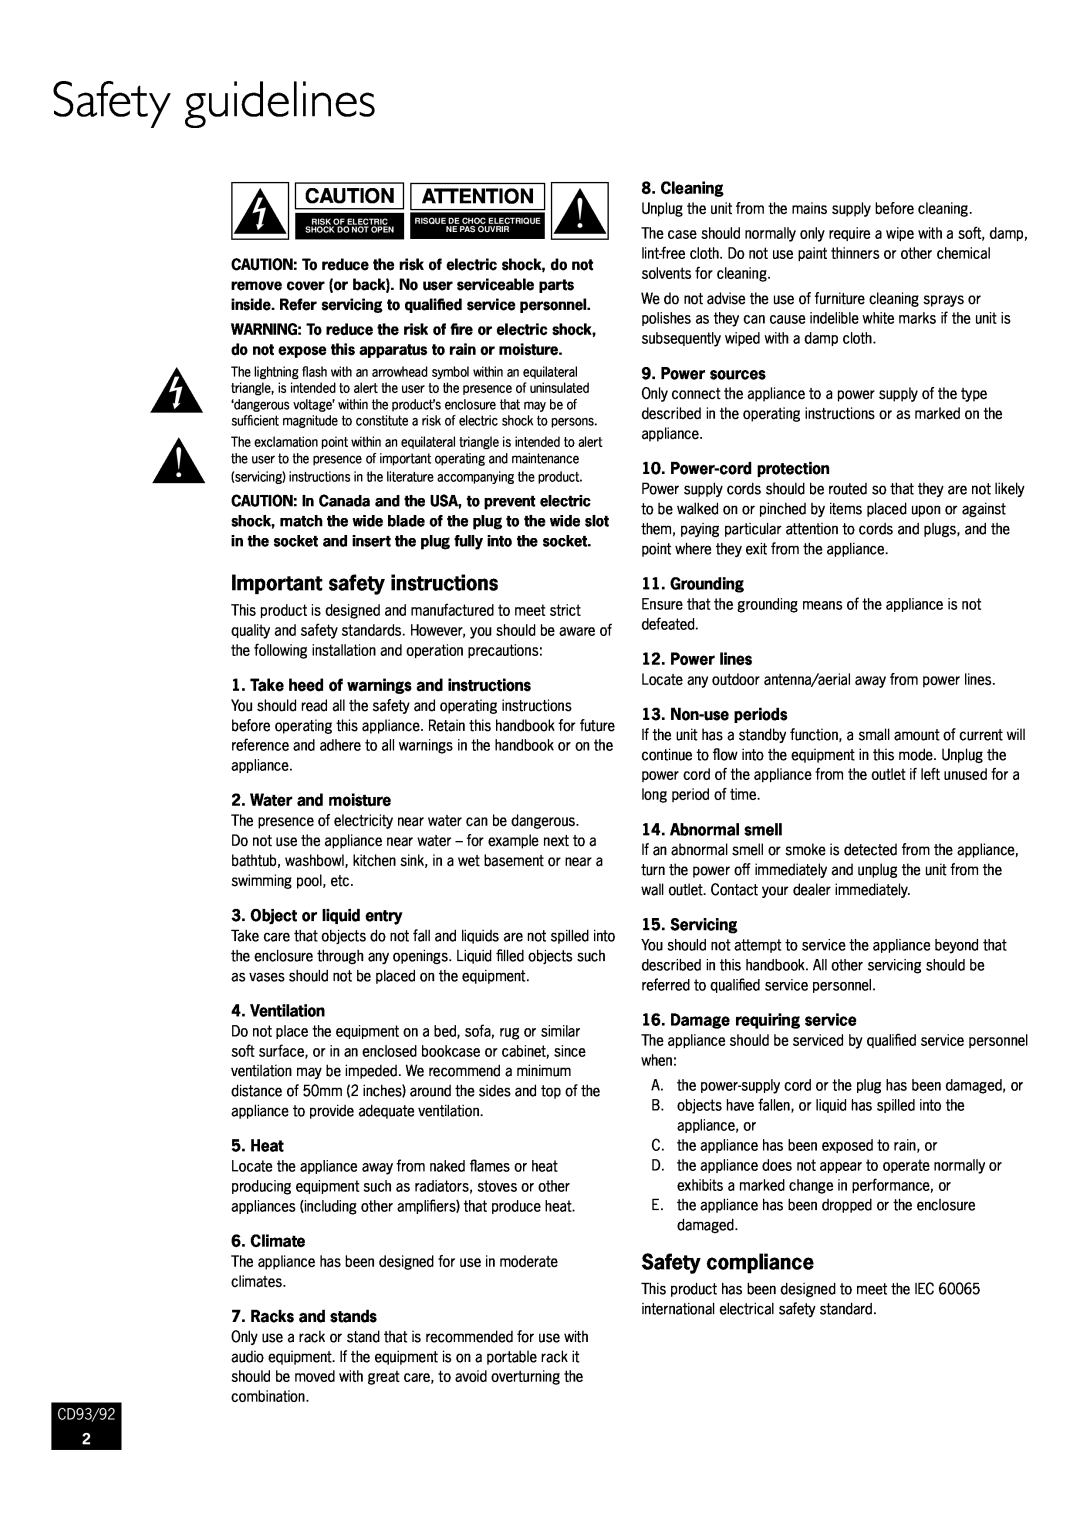 Arcam manual Safety guidelines, Important safety instructions, Safety compliance, CD93/92 